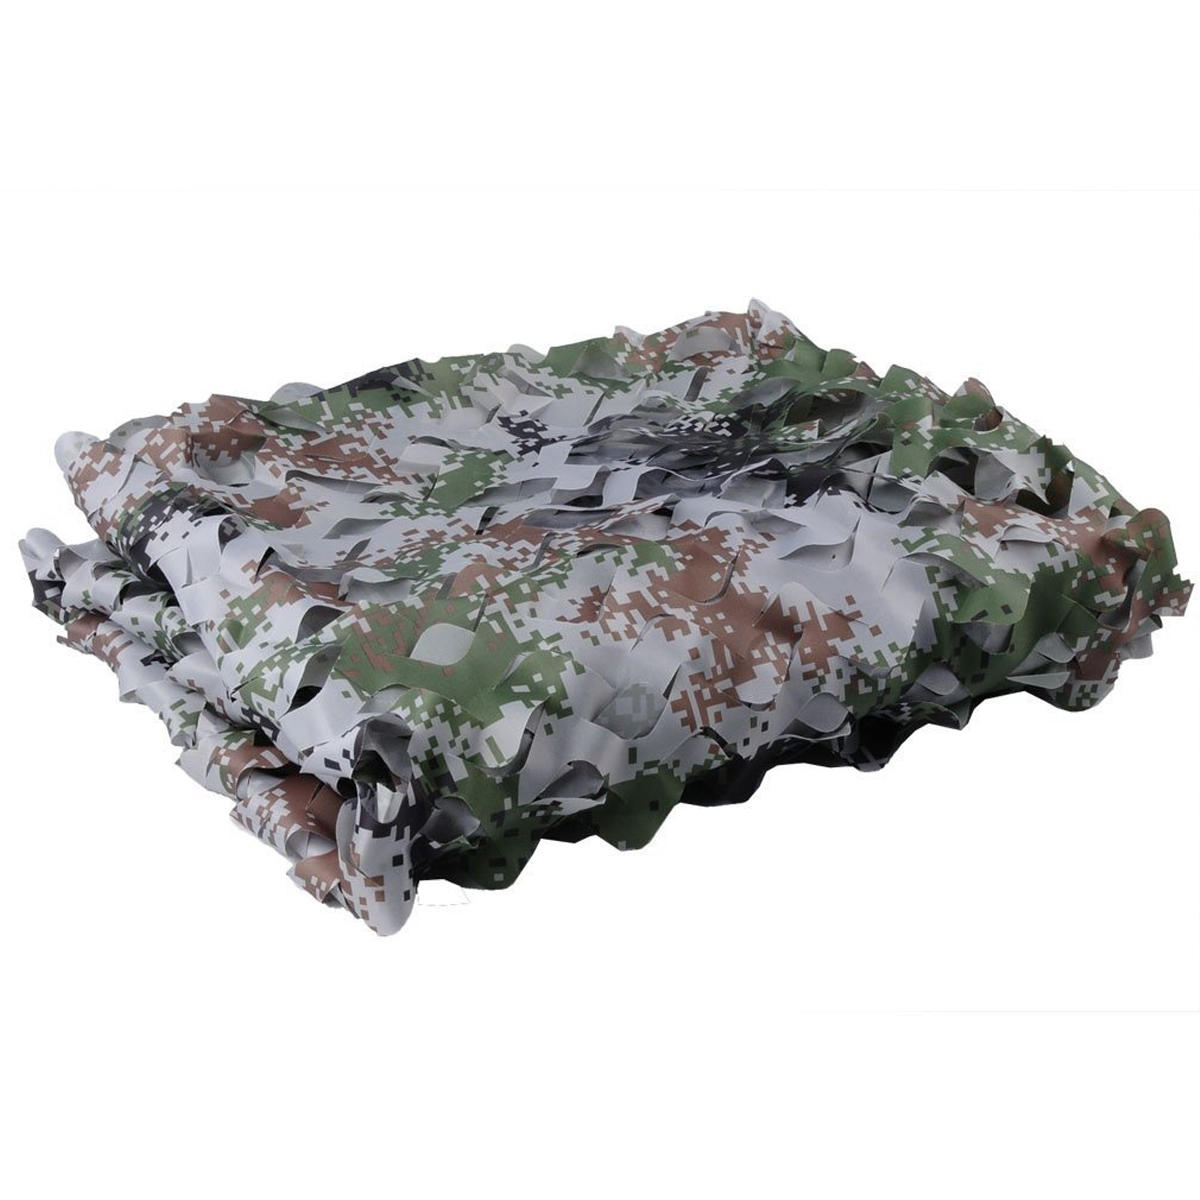 Outdoor Camping Woodland Leaves Digitaal Camouflage Netto Tactisch Dubbellaags Netting Web